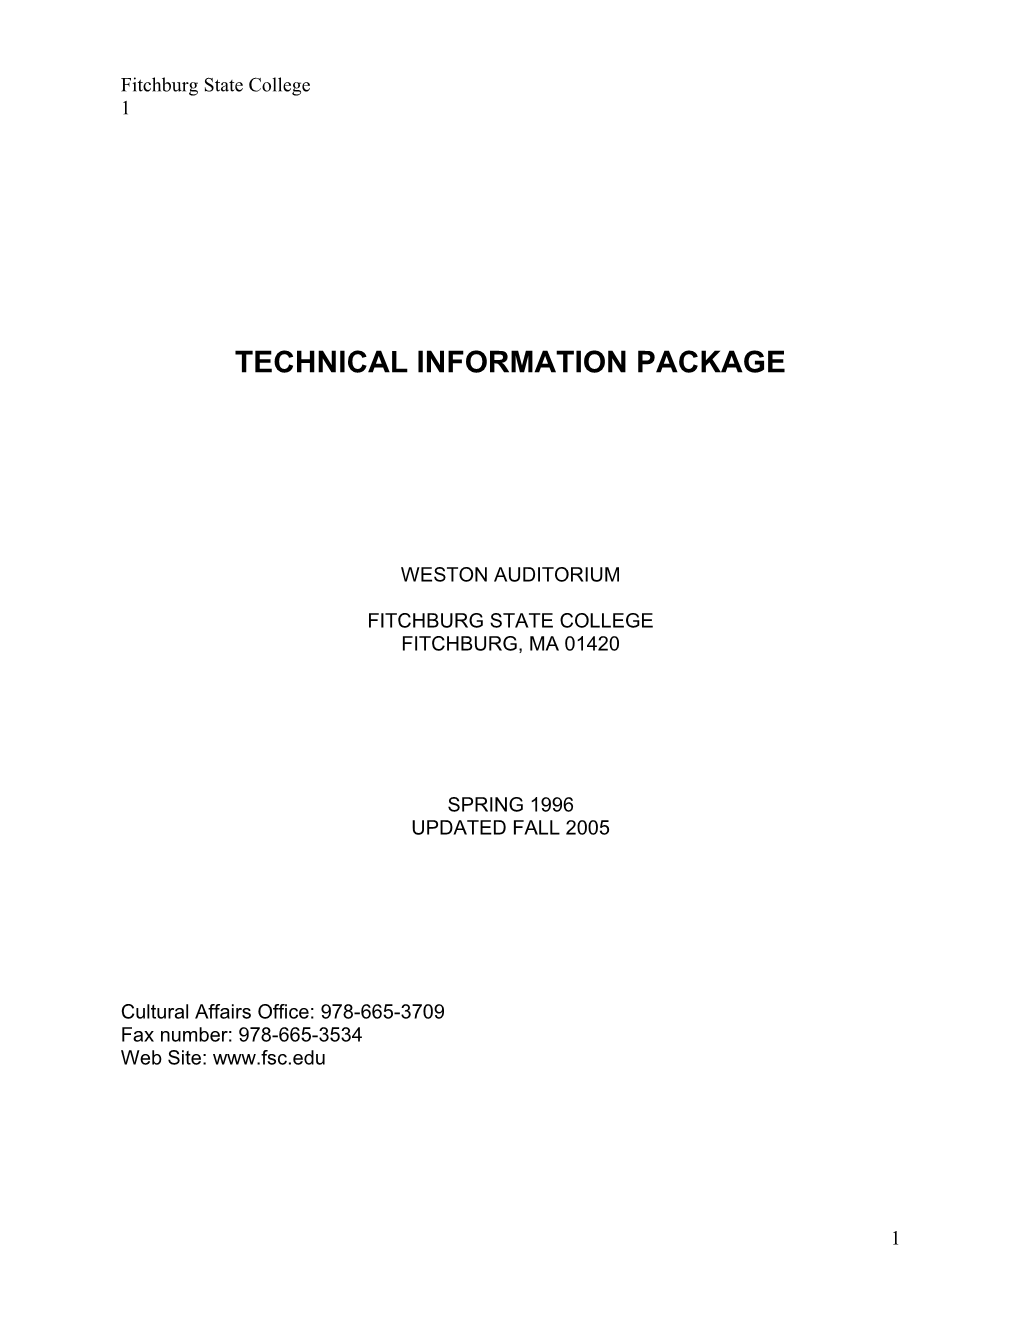 Technical Information Package